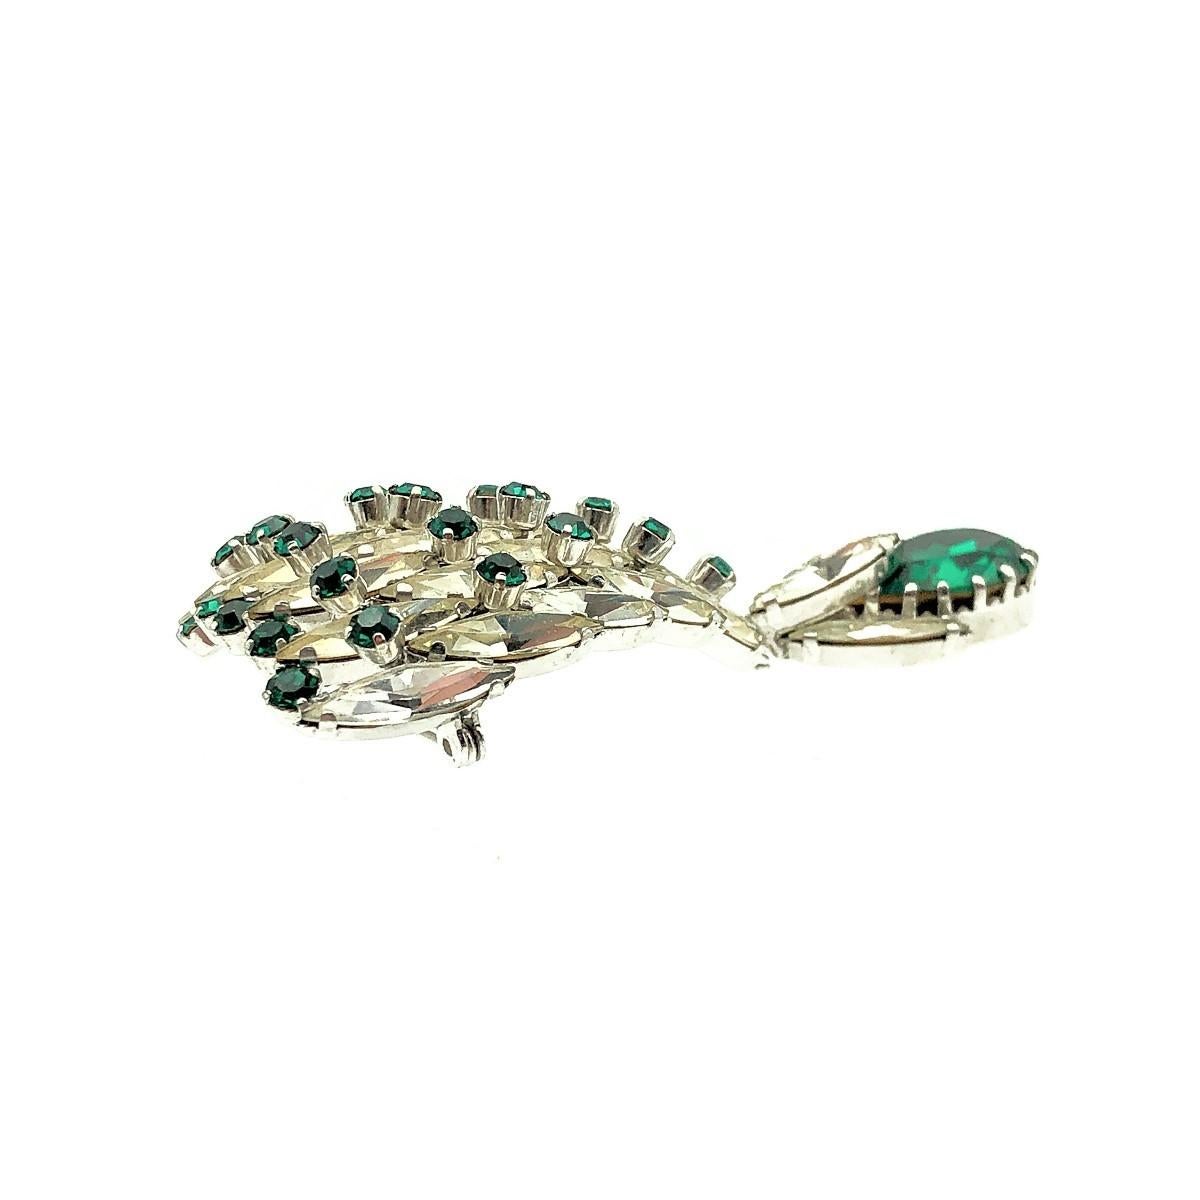 An especially captivating vintage EFBI Austria Emerald Brooch and Earrings demi parure, dating to the glorious 1950s. Crafted with high quality emerald and white crystals in rhodium plated metal. The brooch features a rare and eye-catching arched